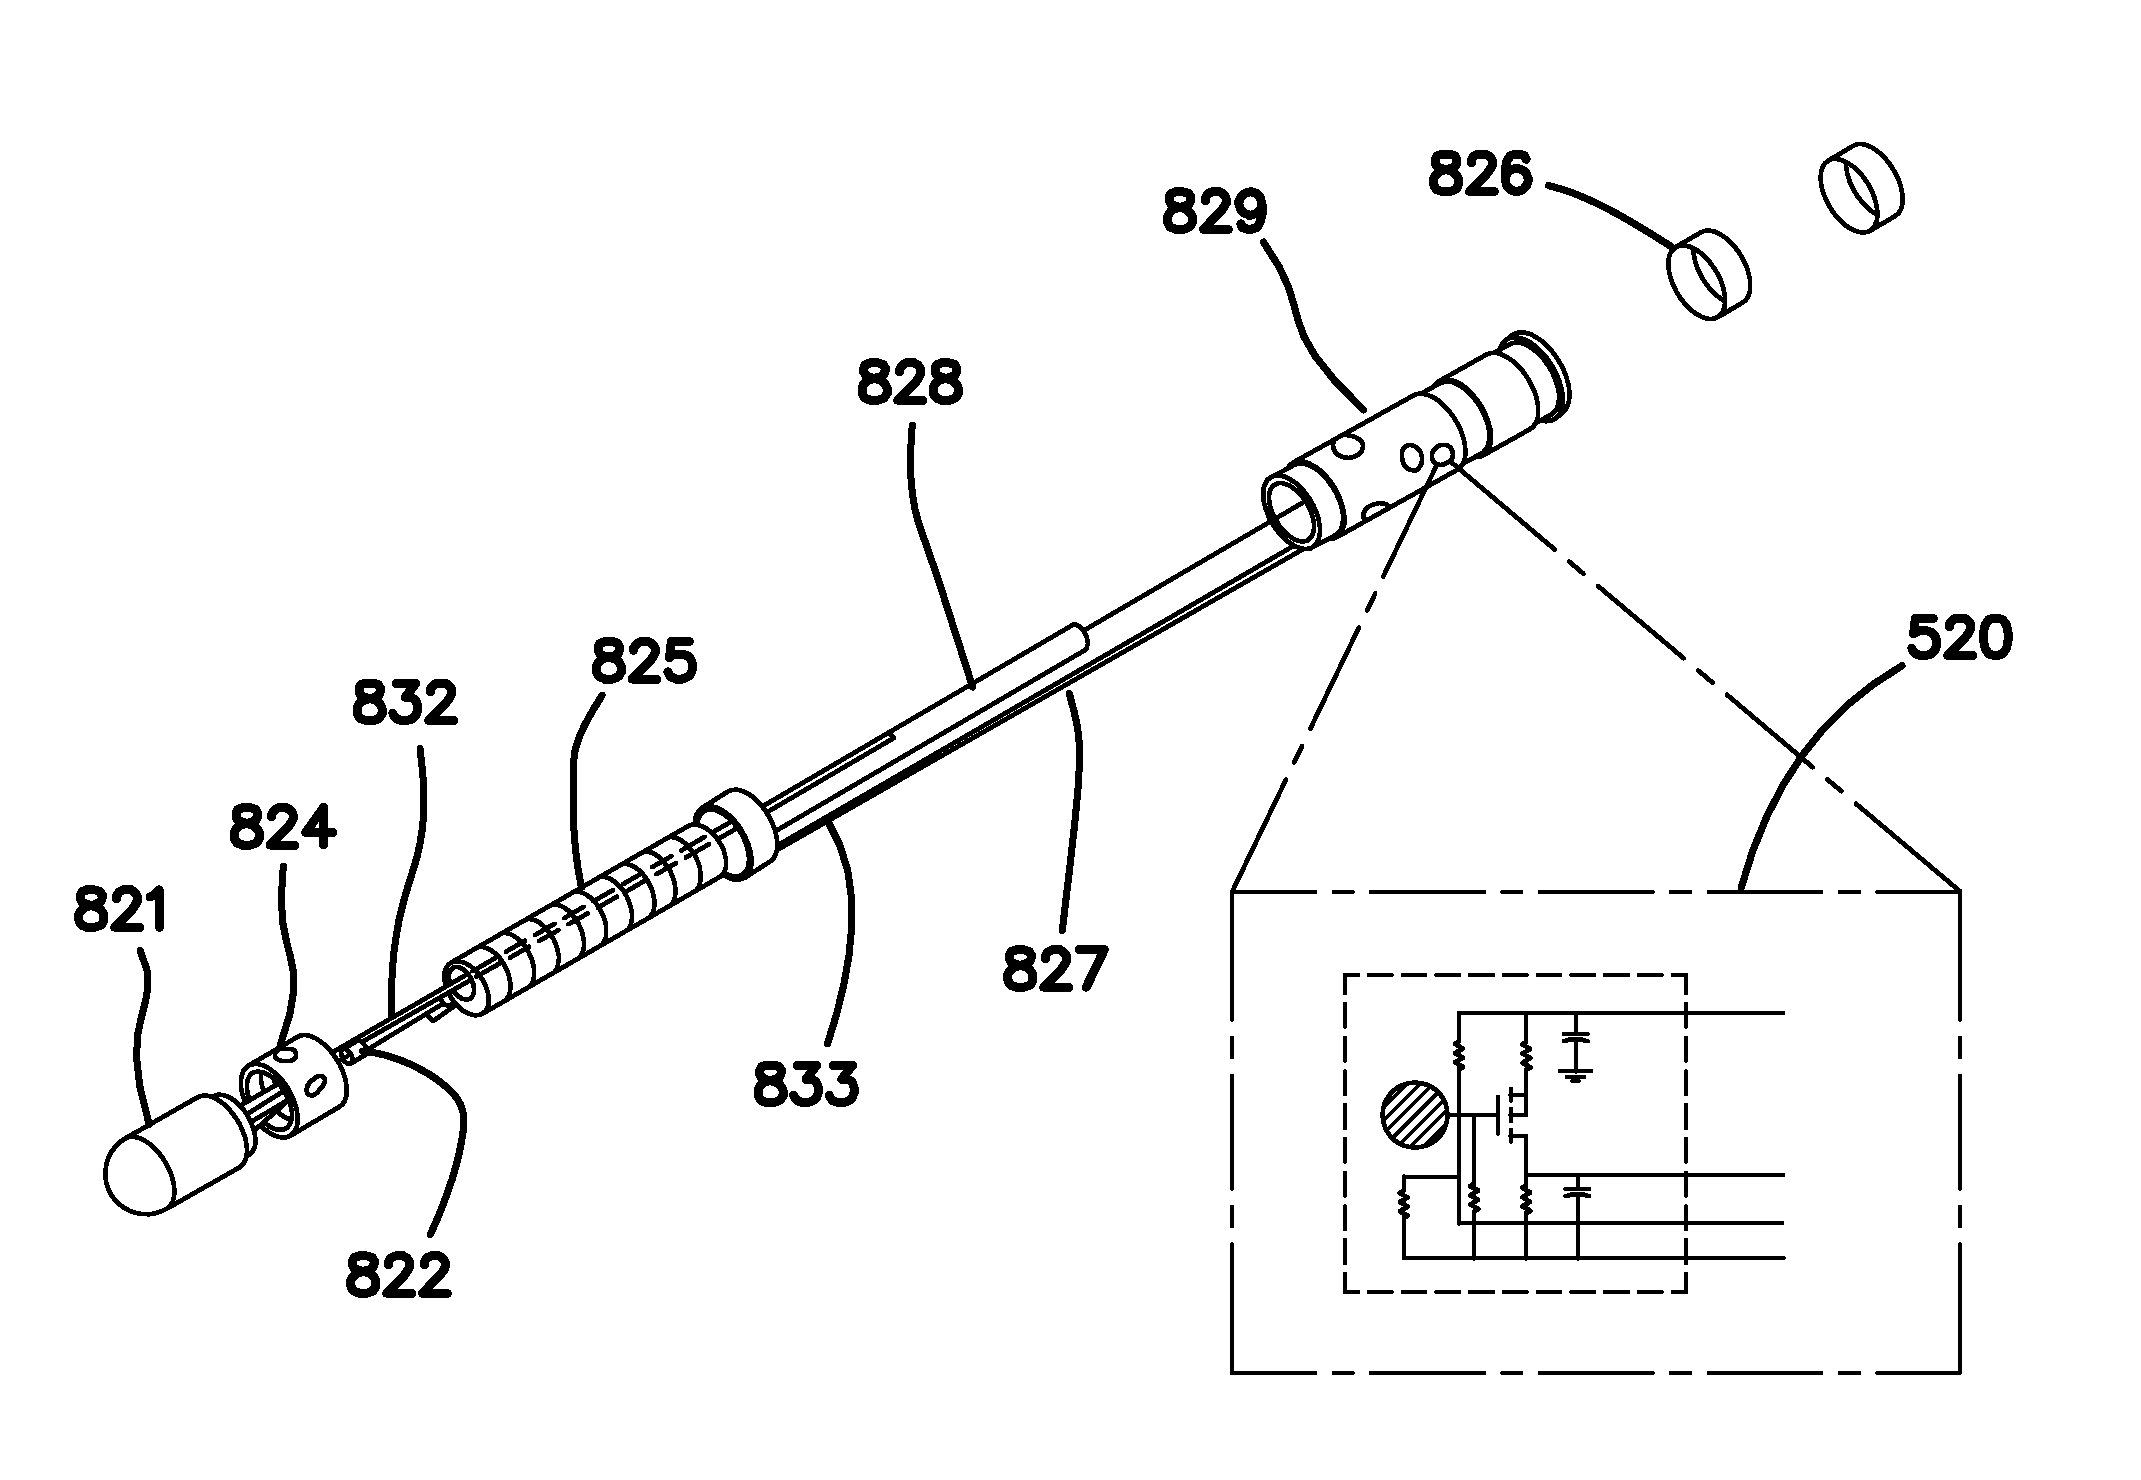 Method and apparatus for magnetically guided catheter for renal denervation employing mosfet sensor array